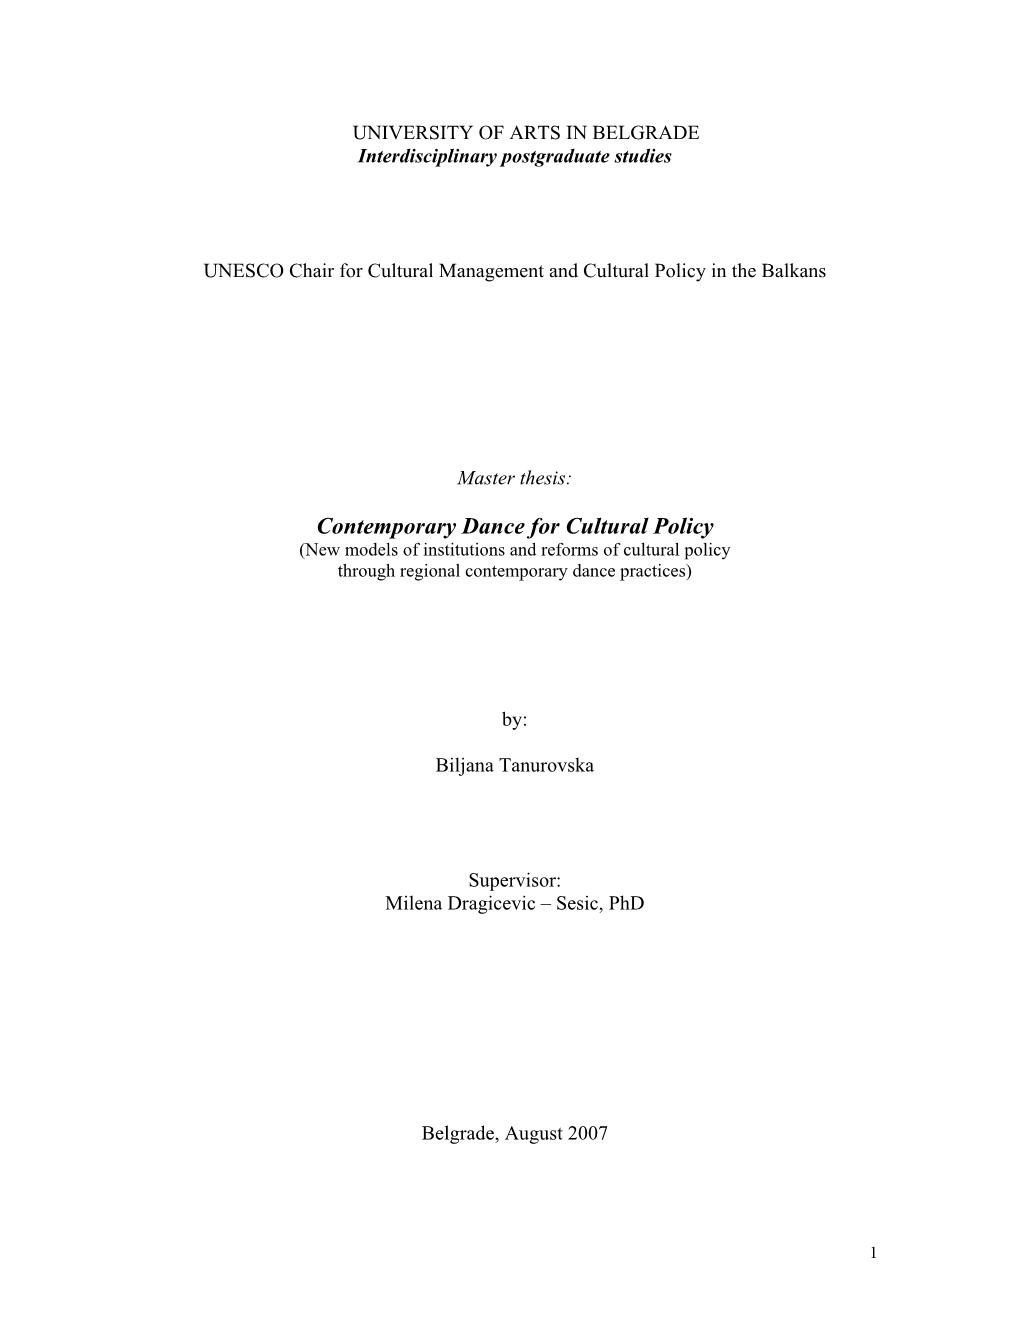 Contemporary Dance for Cultural Policy (New Models of Institutions and Reforms of Cultural Policy Through Regional Contemporary Dance Practices)